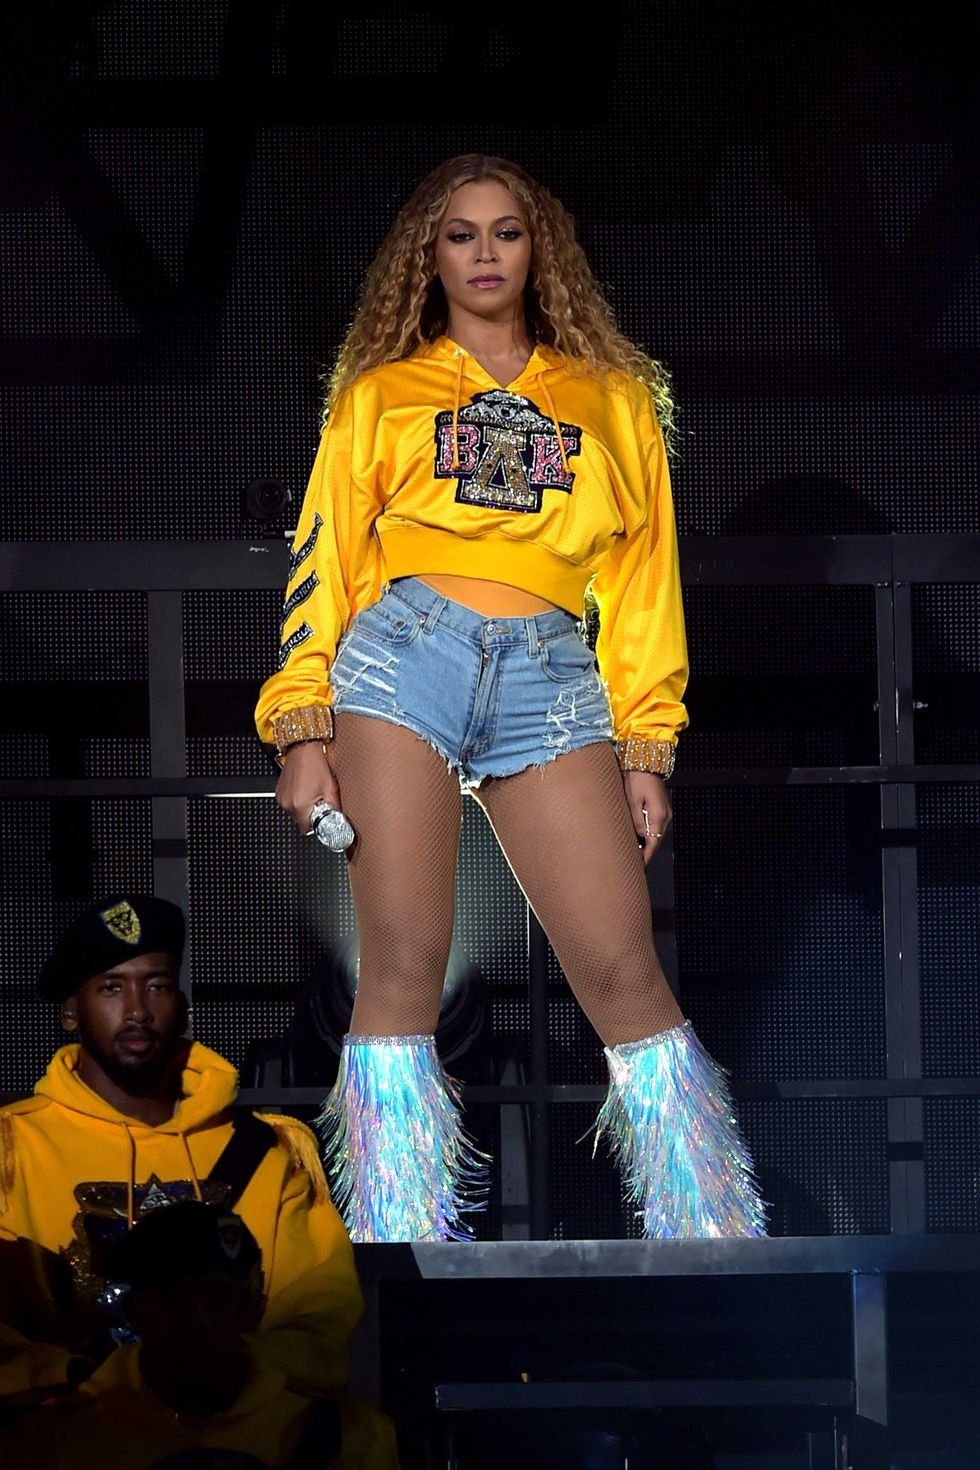 Thigh, Yellow, Performance, Leg, Beauty, Fashion, Stage, Performing arts, Human body, Event, 